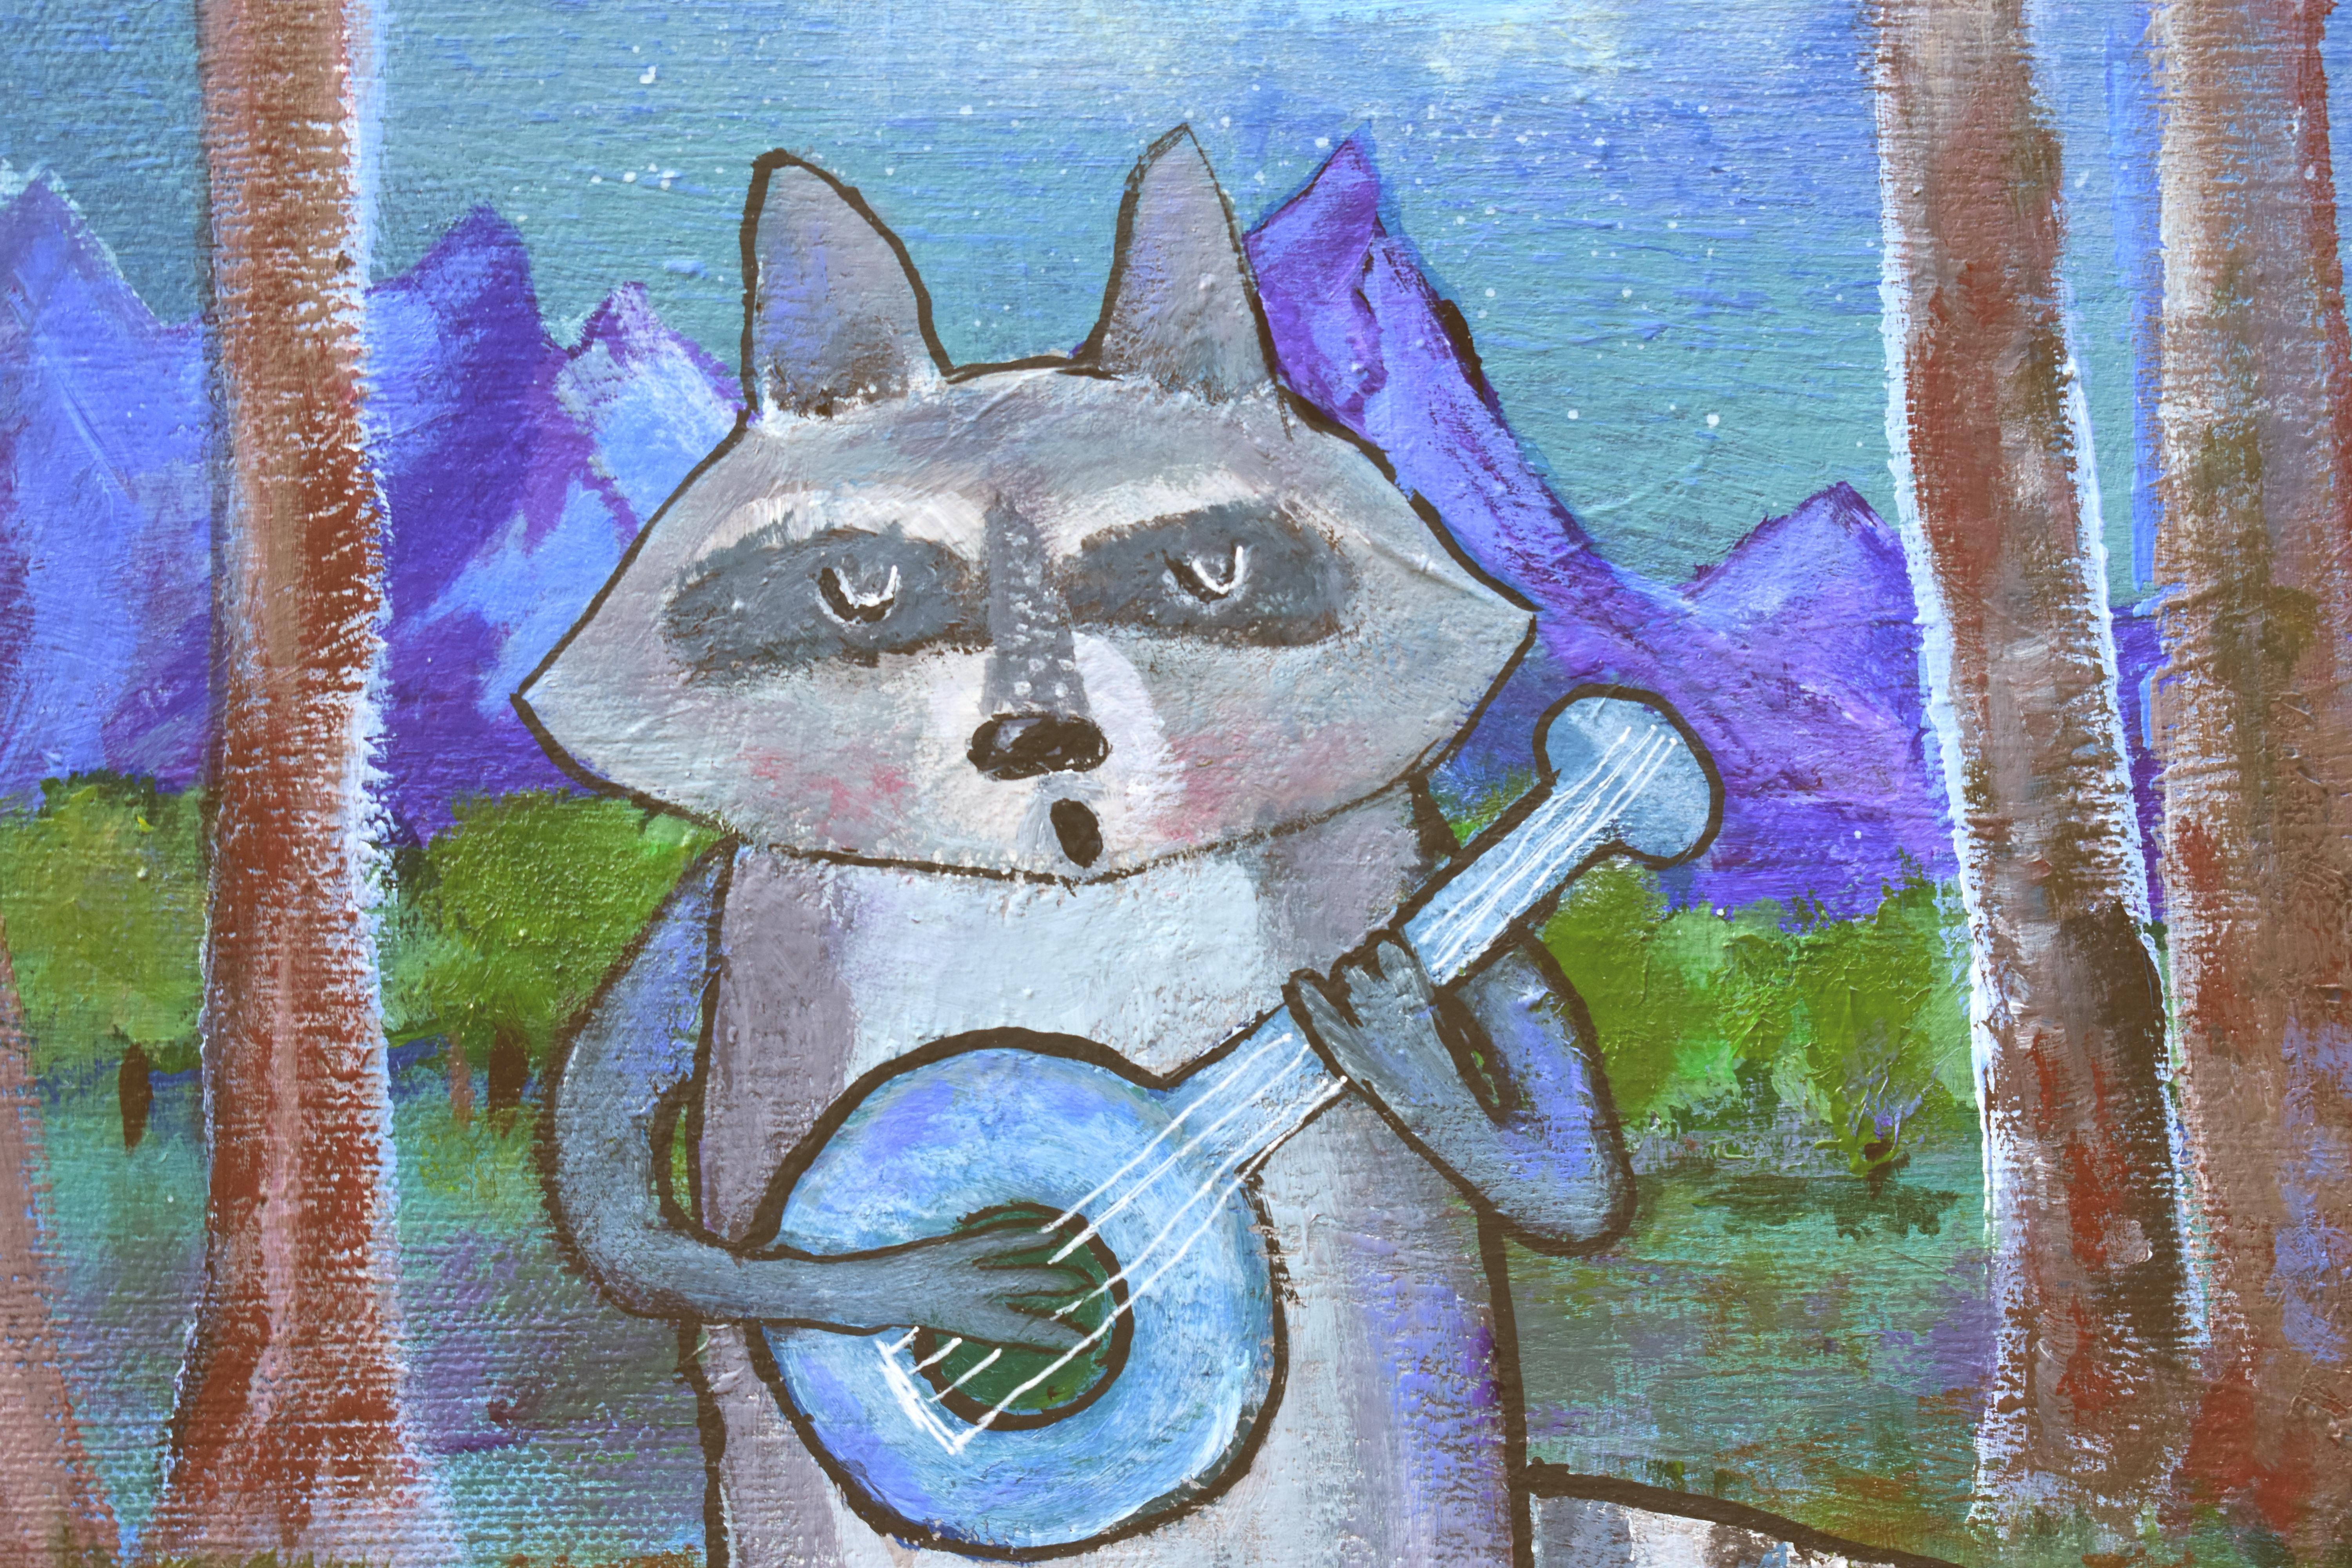 <p>Artist Comments<br>Andrea Doss presents a whimsical fantasy piece of woodland animals playing musical instruments. The pale crescent moon gives a silvery glow as the raccoon, frog, and squirrel serenade at night. 